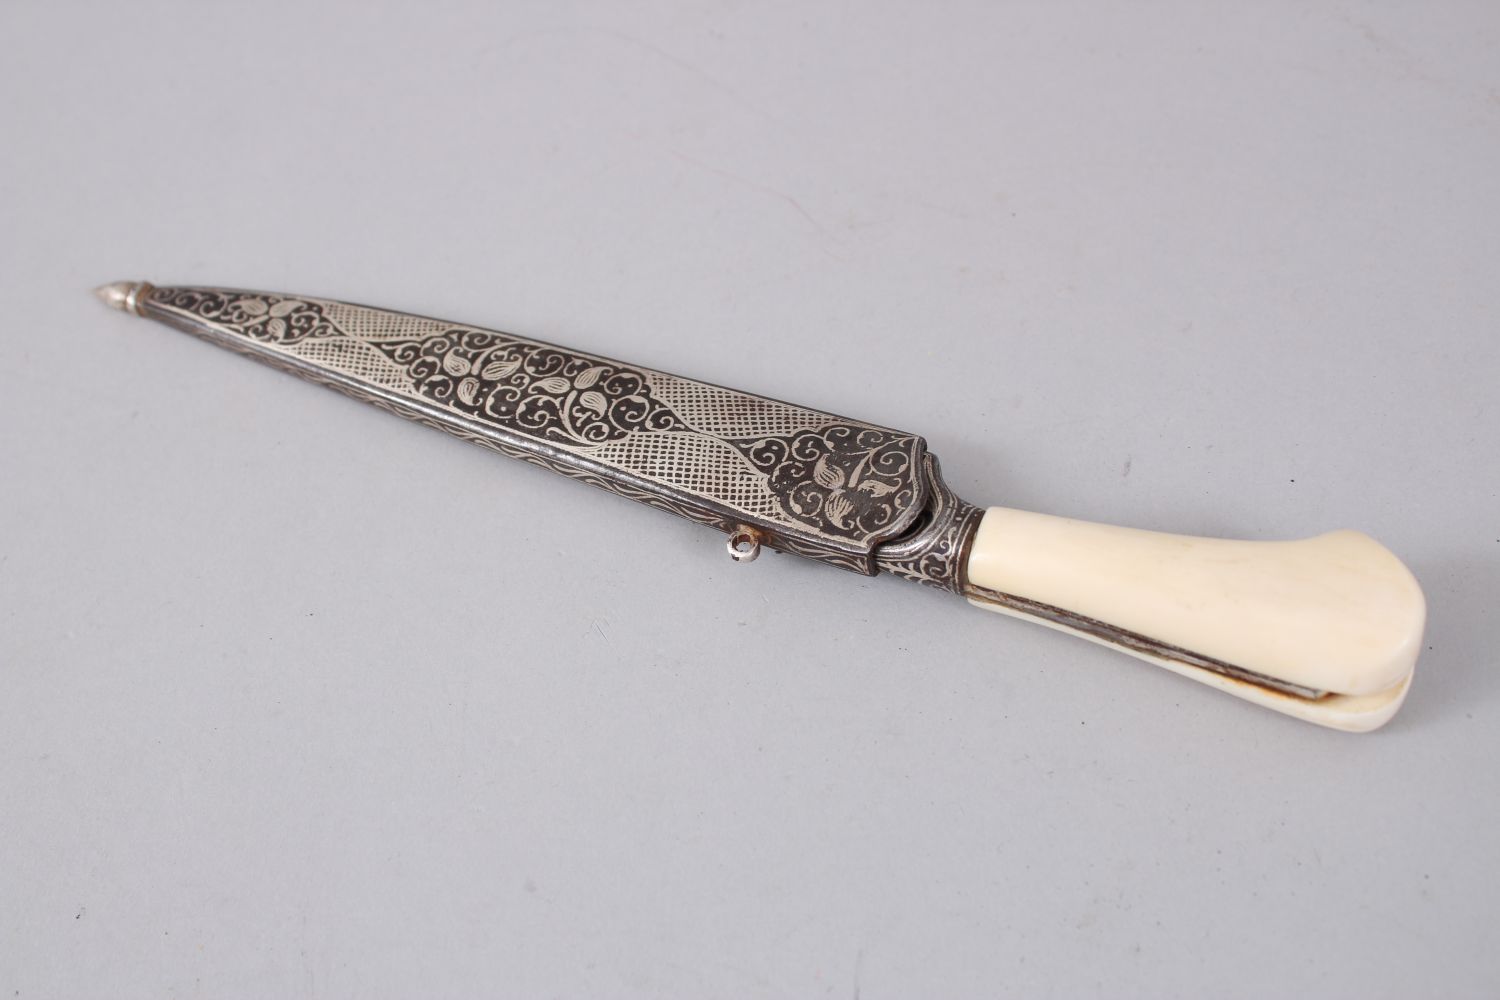 A 19TH CENTURY INDIAN DAGGER with ivory handle and silver inlaid sheath, 25cm long. - Image 4 of 4